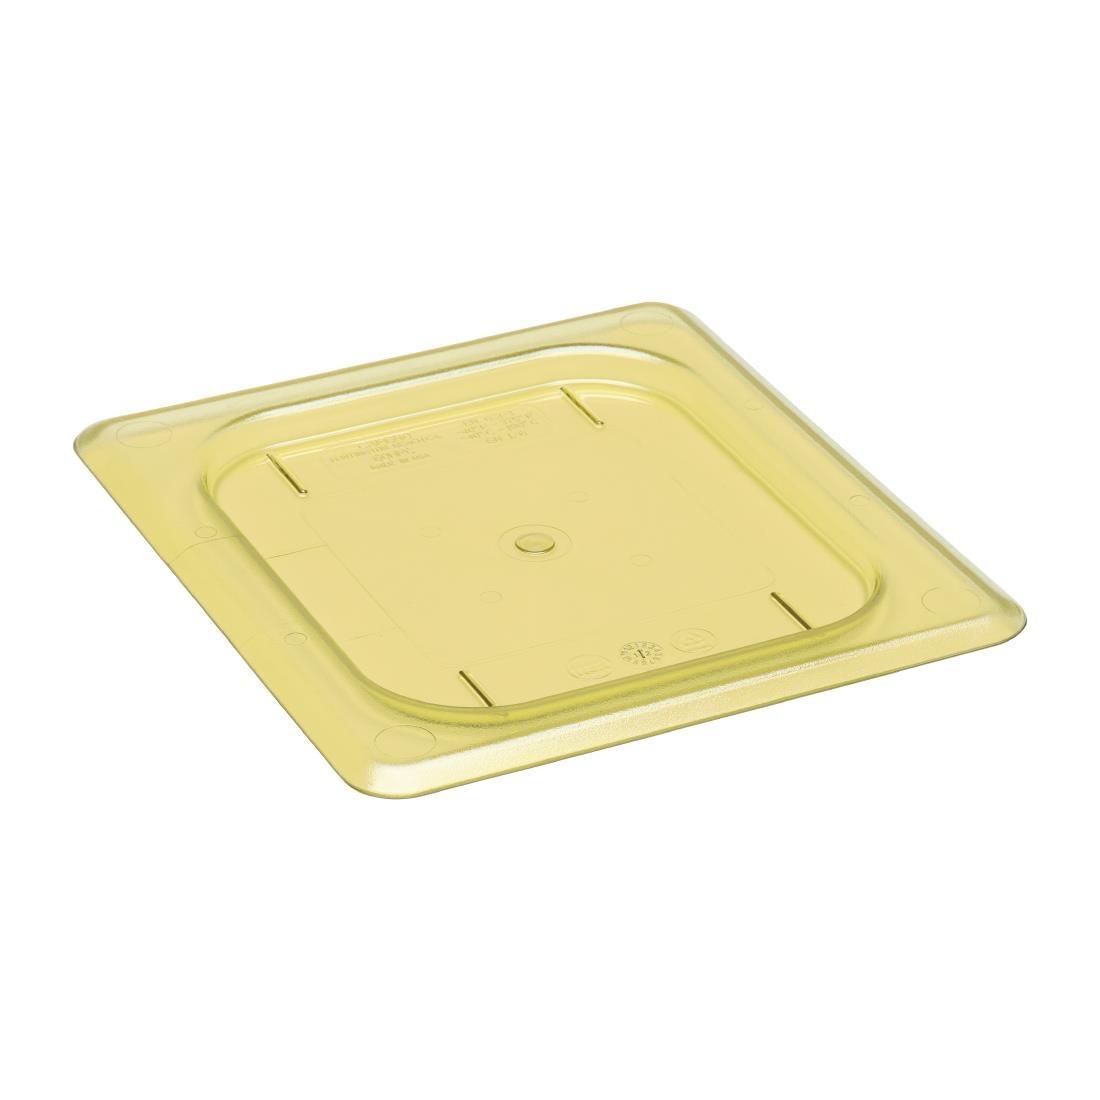 Cambro High Heat 1/6 Gastronorm Food Pan Lid - DW524  - 1